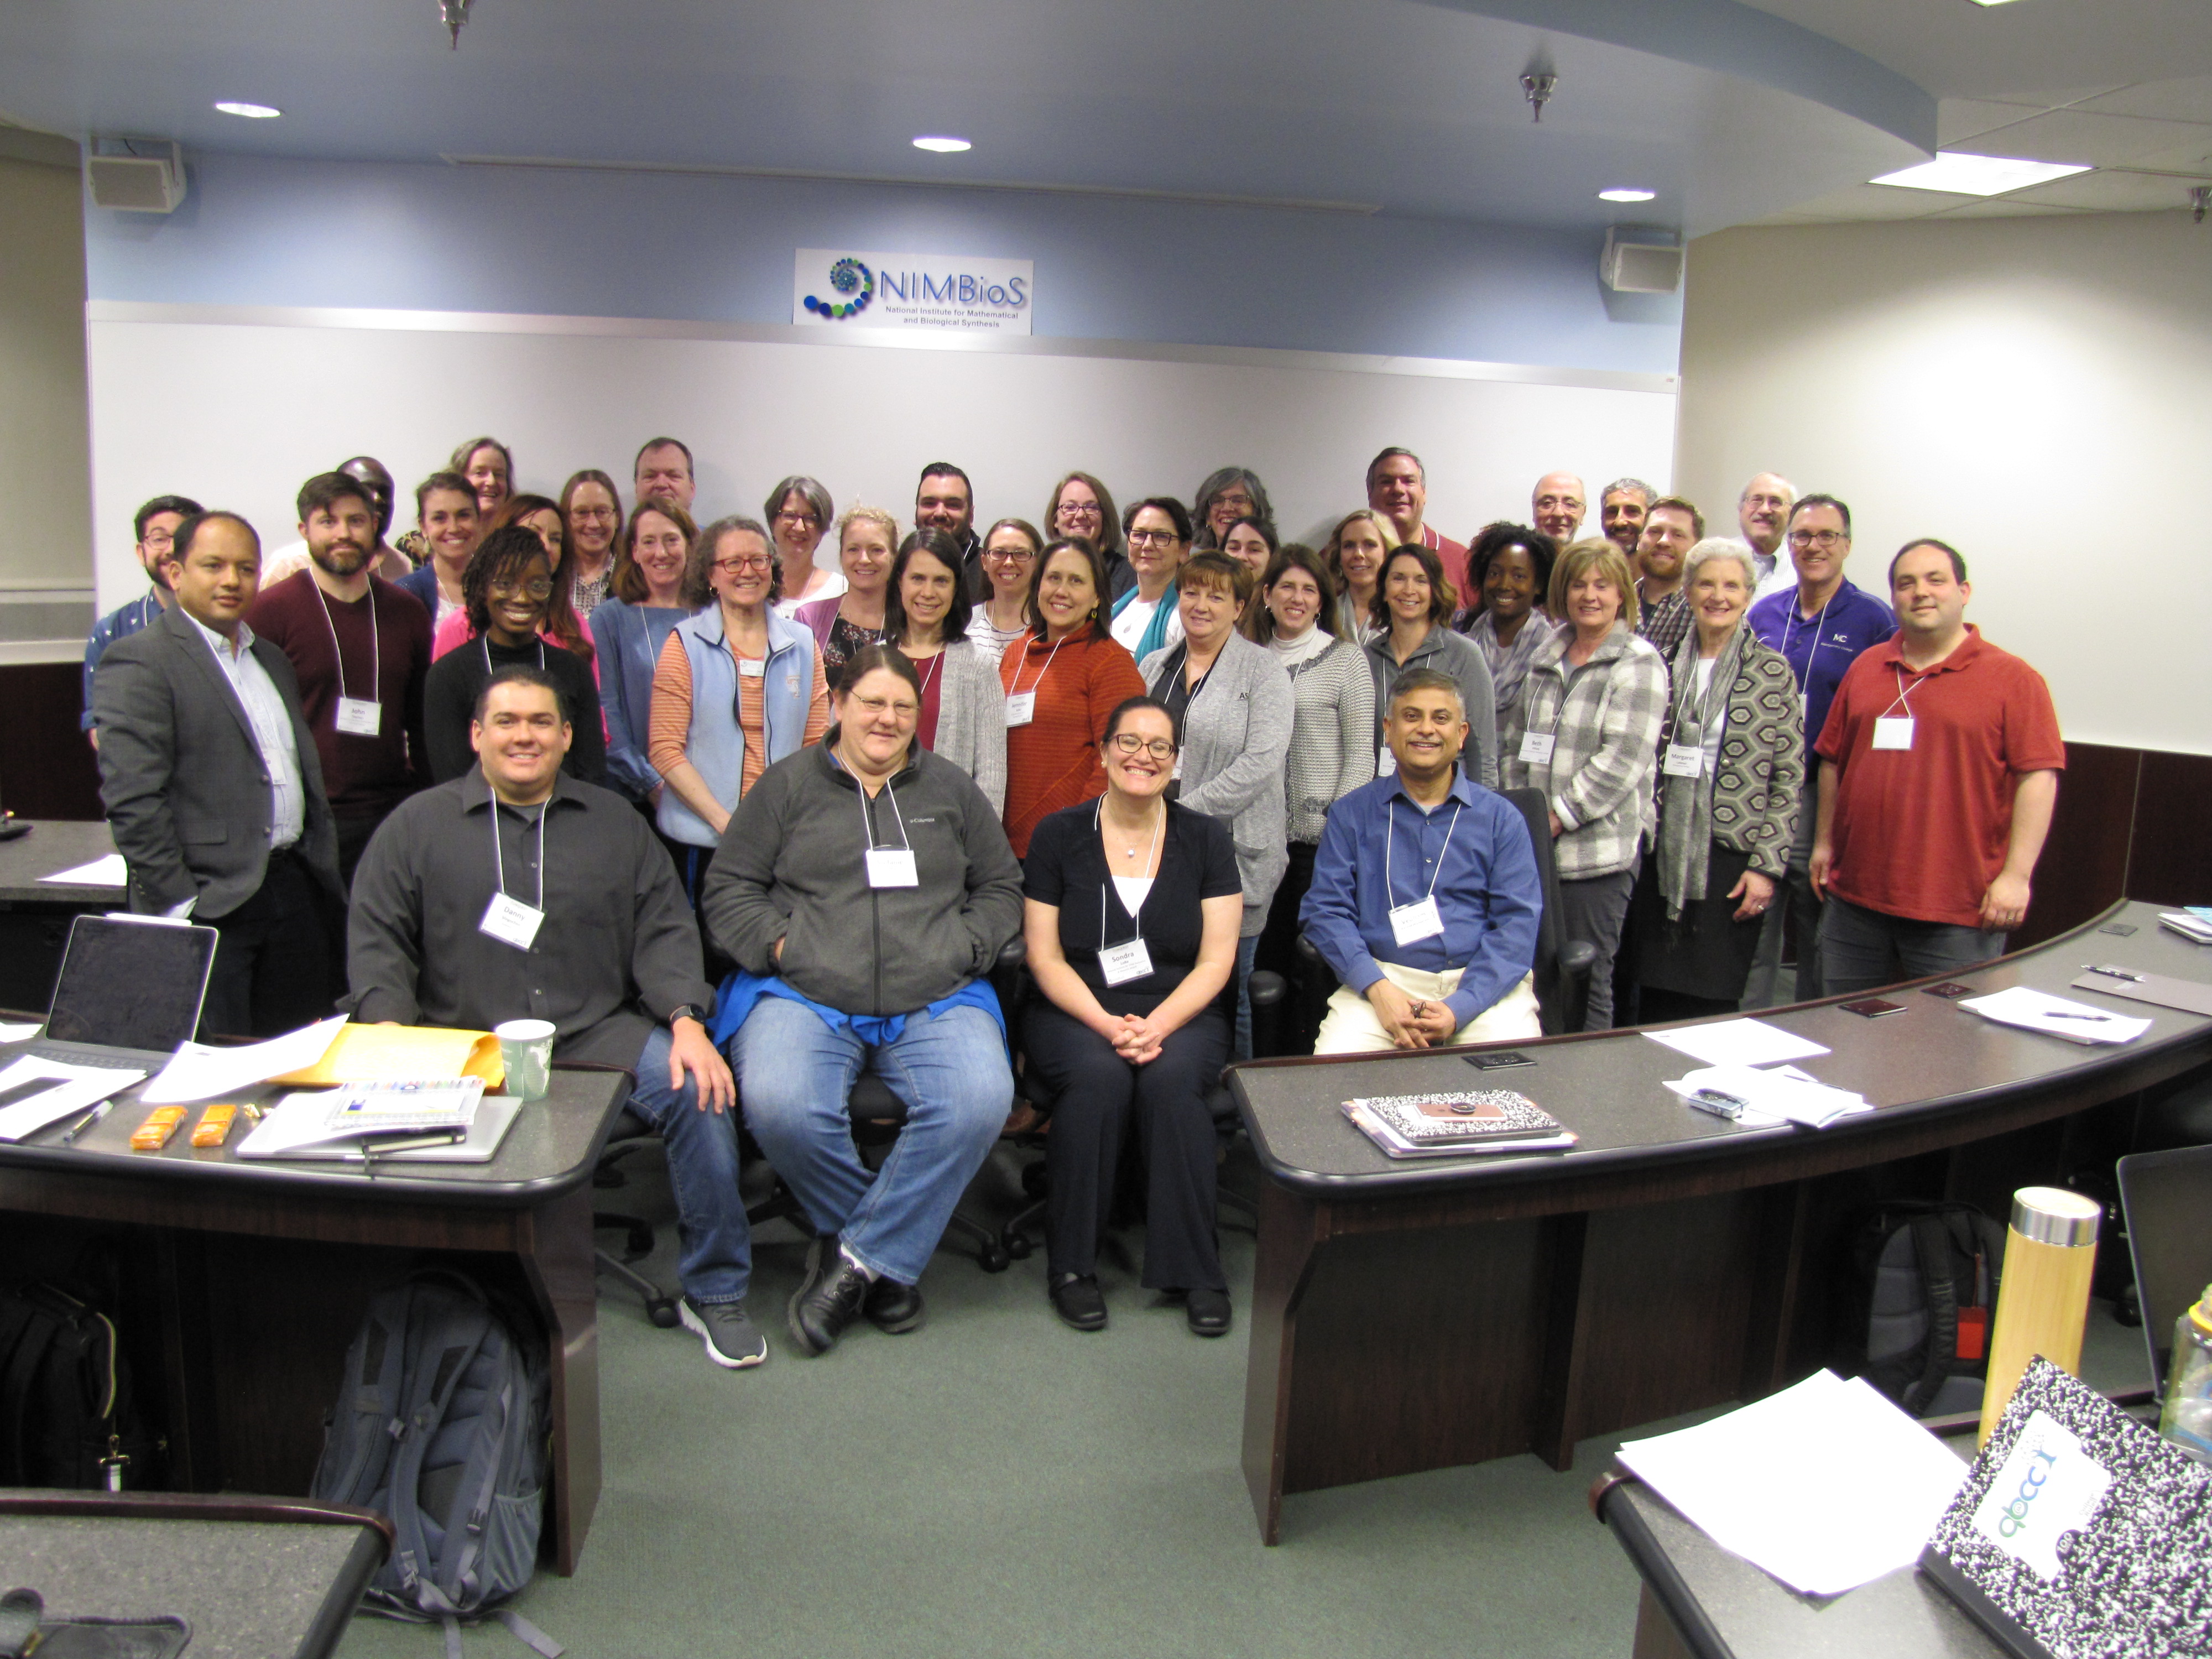 group photo of qb@cc attendees